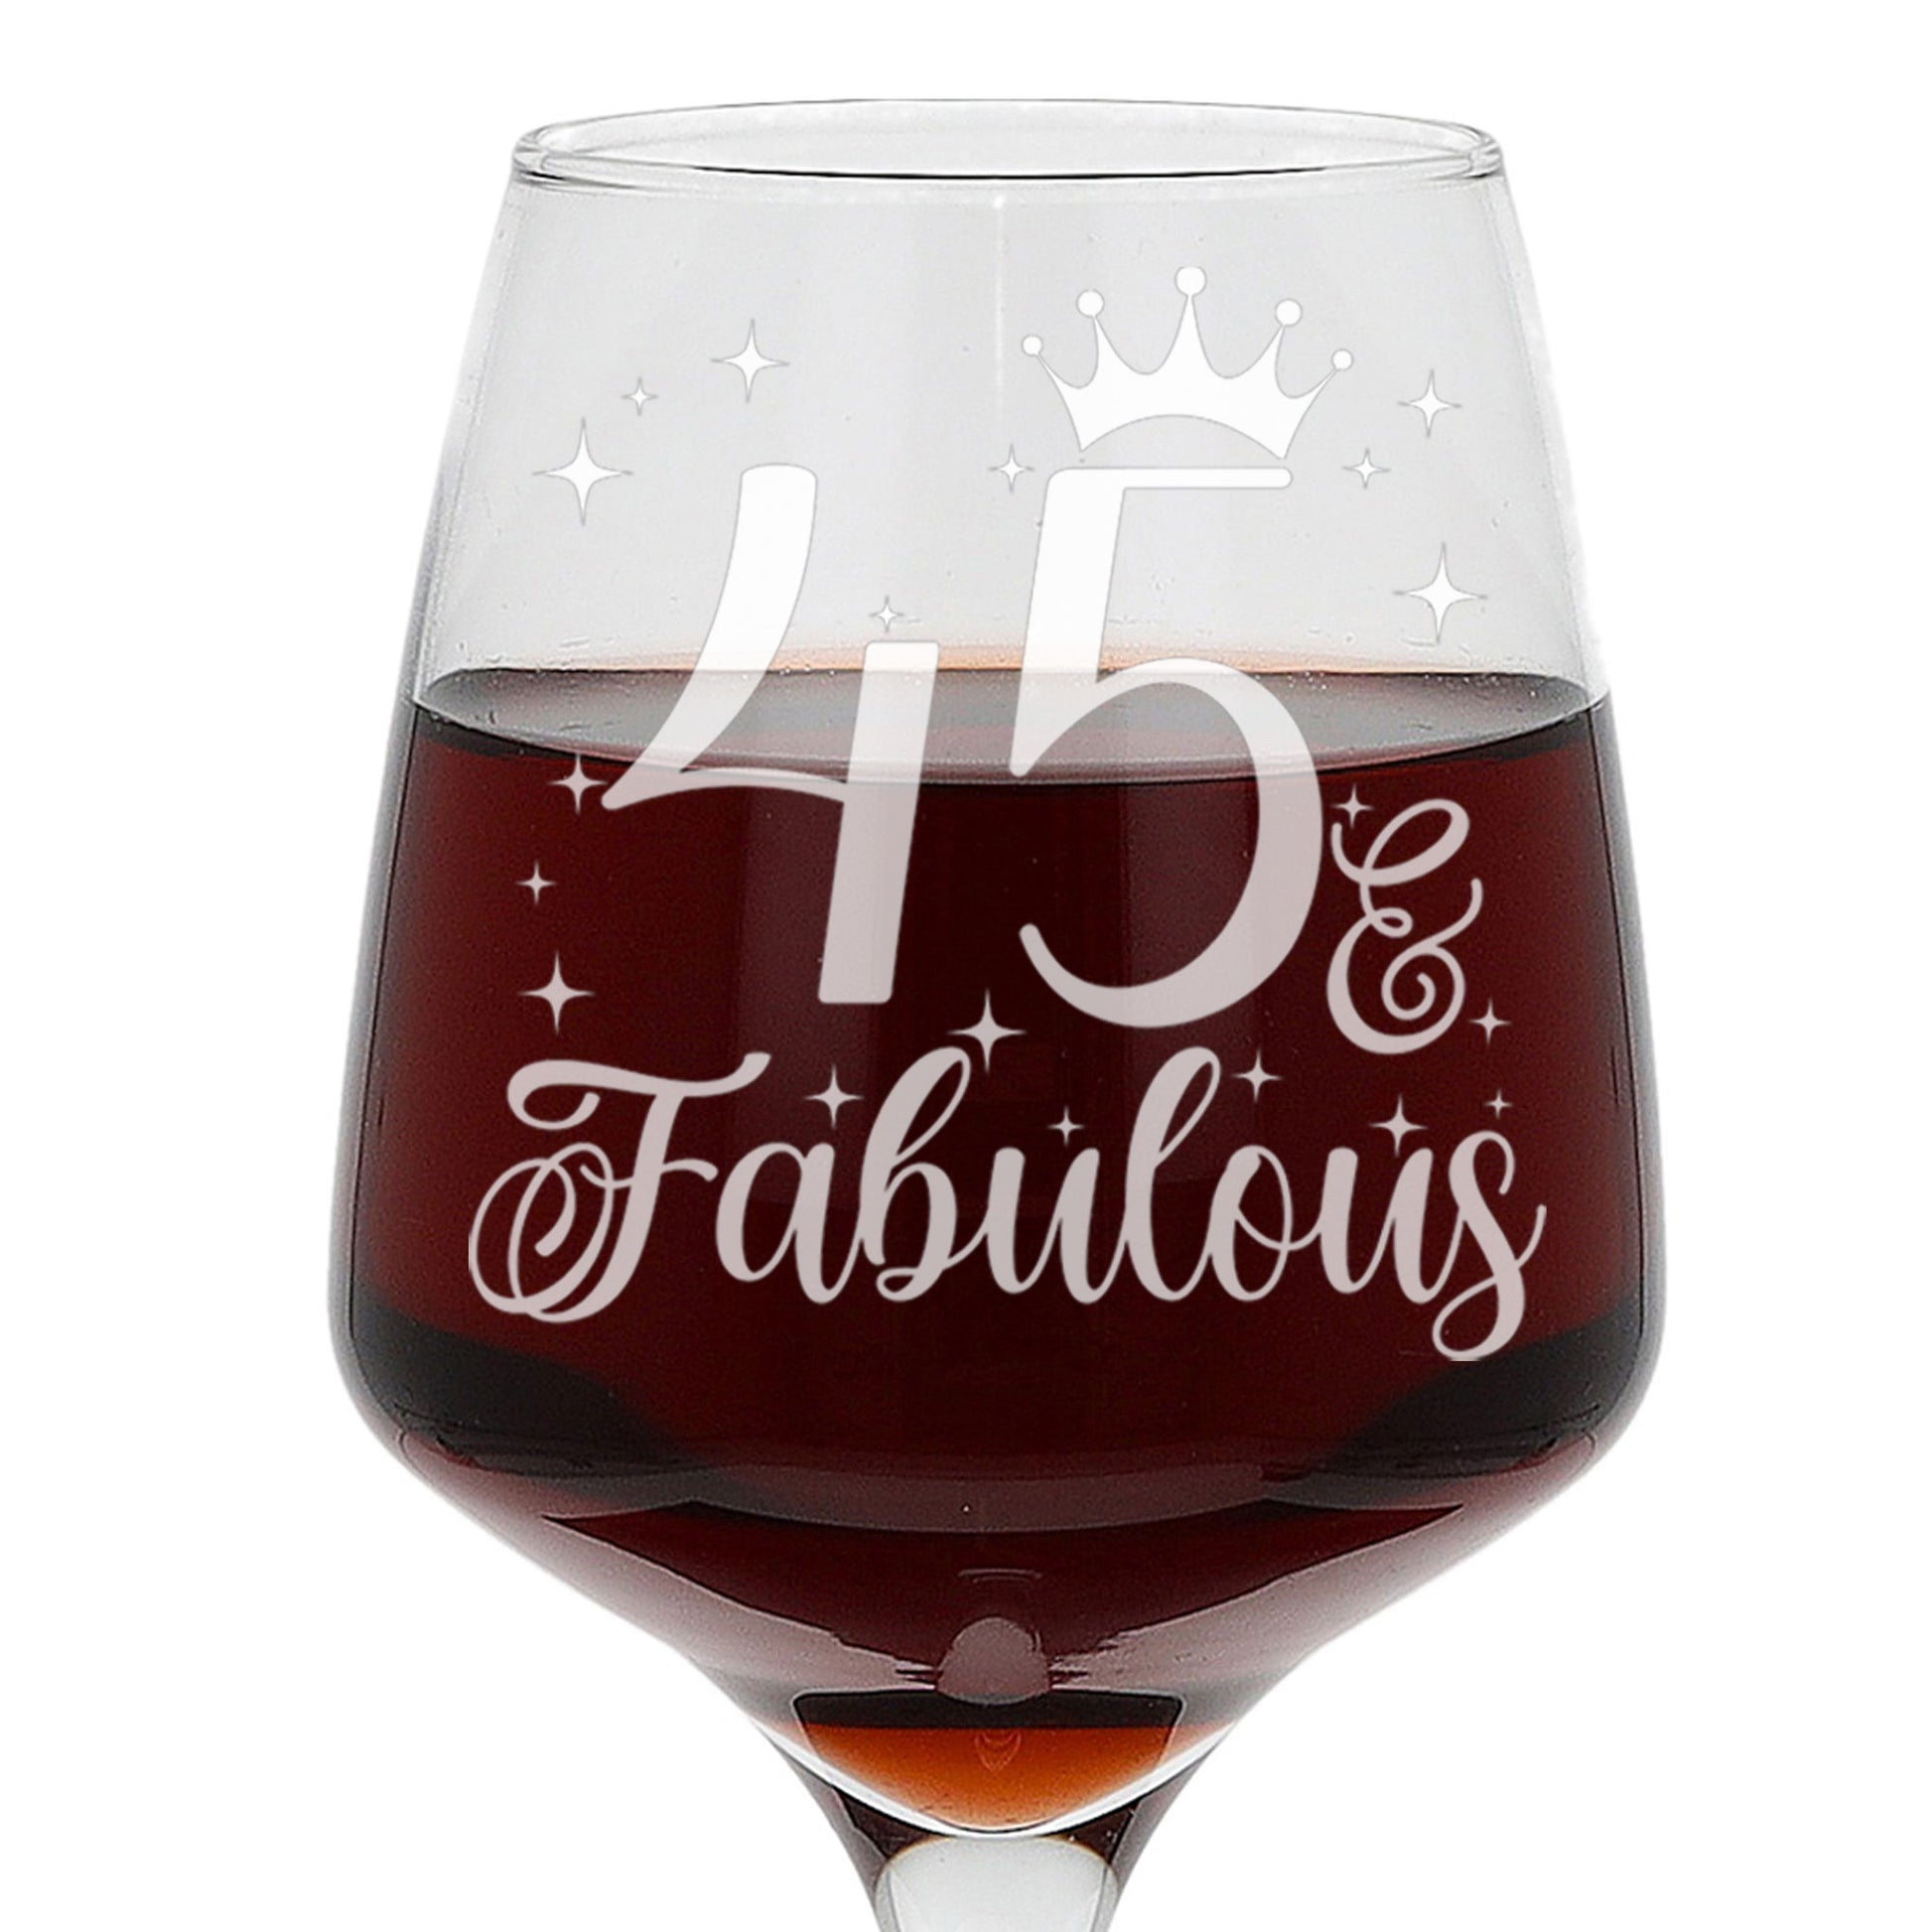 45 & Fabulous 45th Birthday Gift Engraved Wine Glass and/or Coaster Set  - Always Looking Good -   